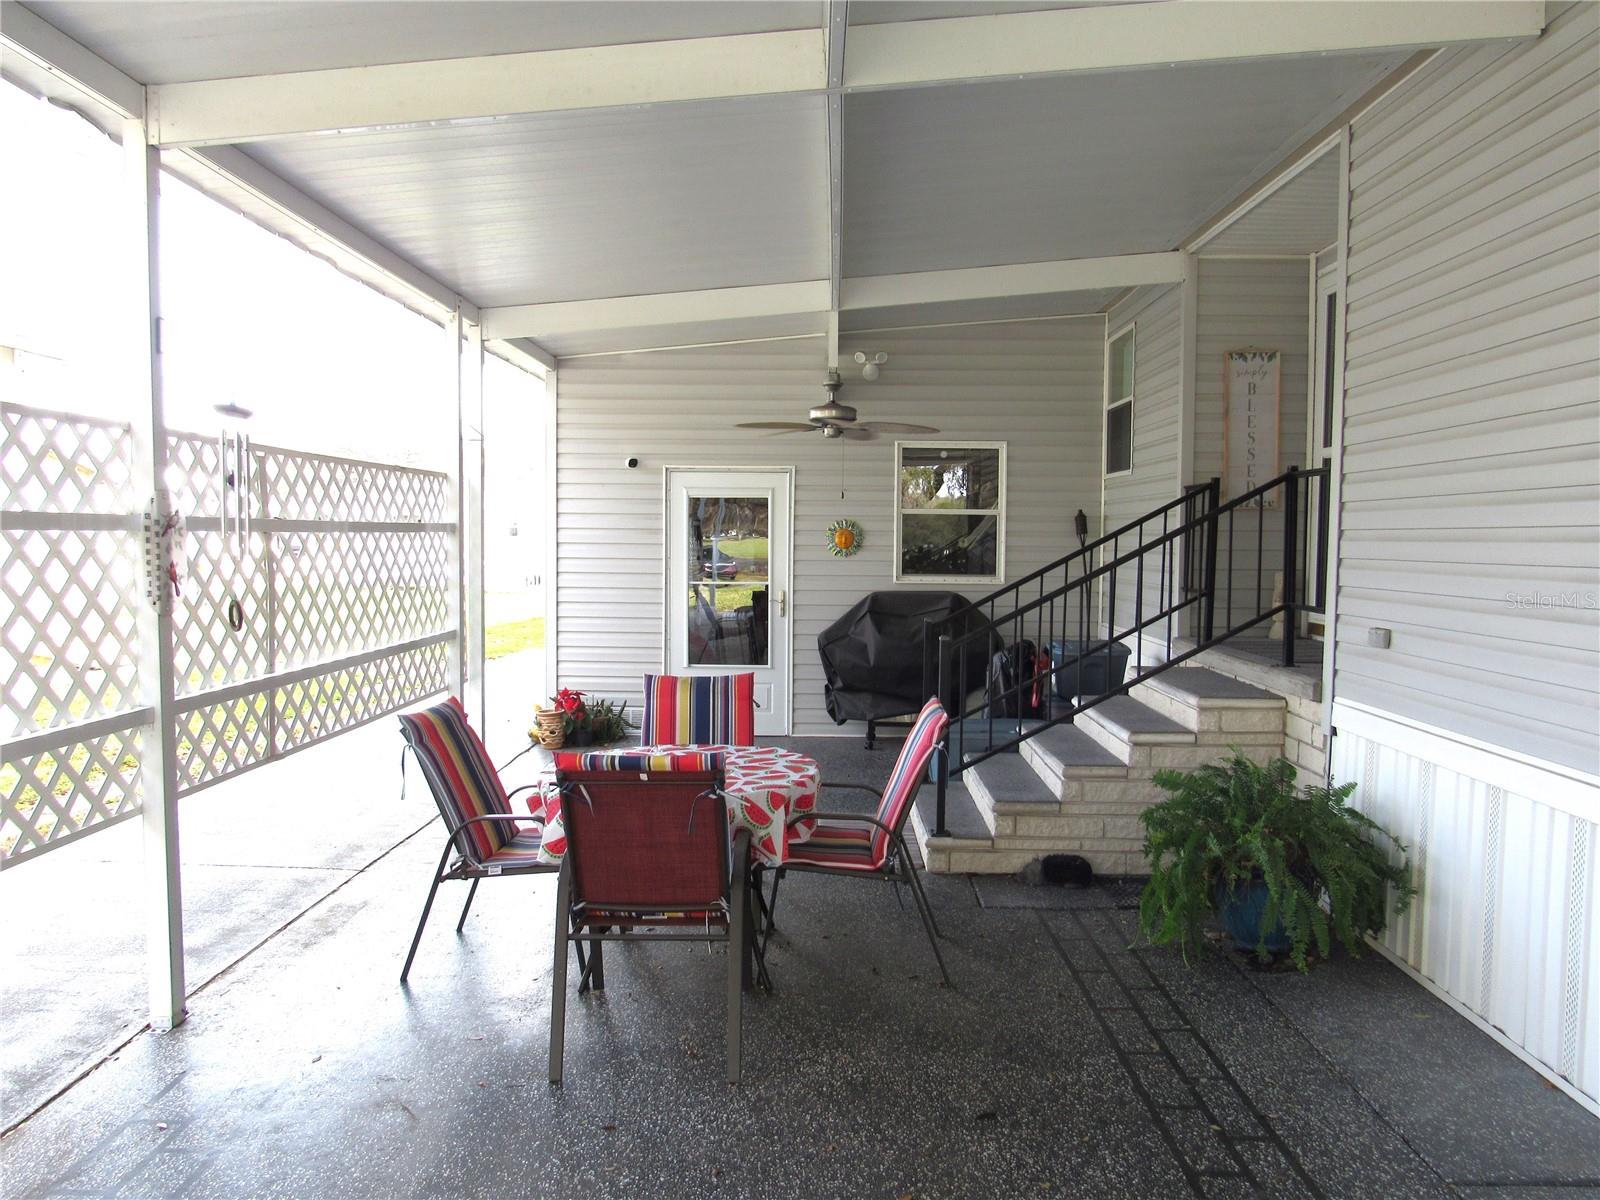 Carport seating area, main entry, large attached utility room.